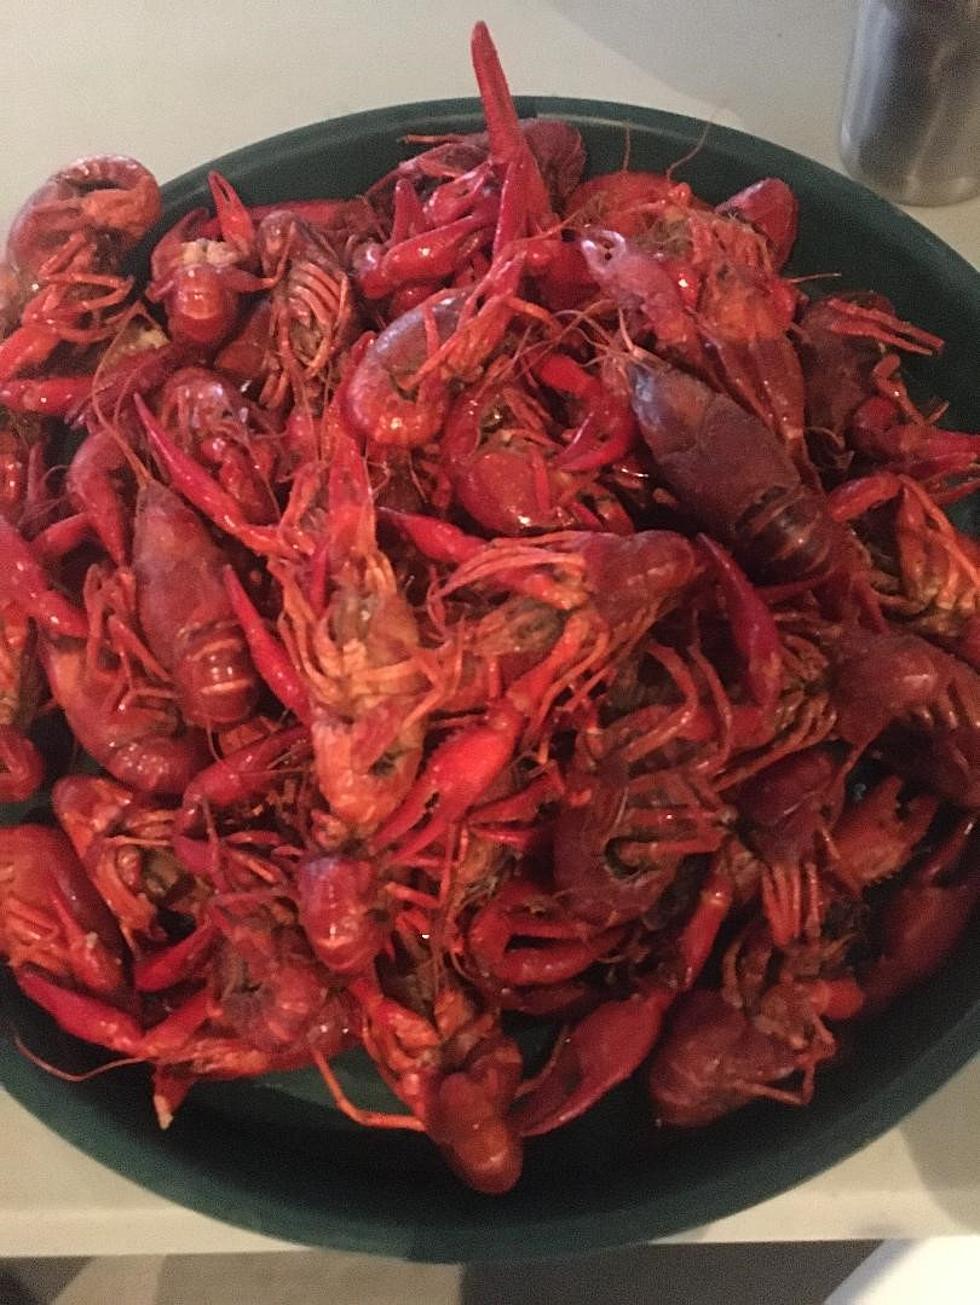 10 Steps to Boiling Crawfish Like a Pro